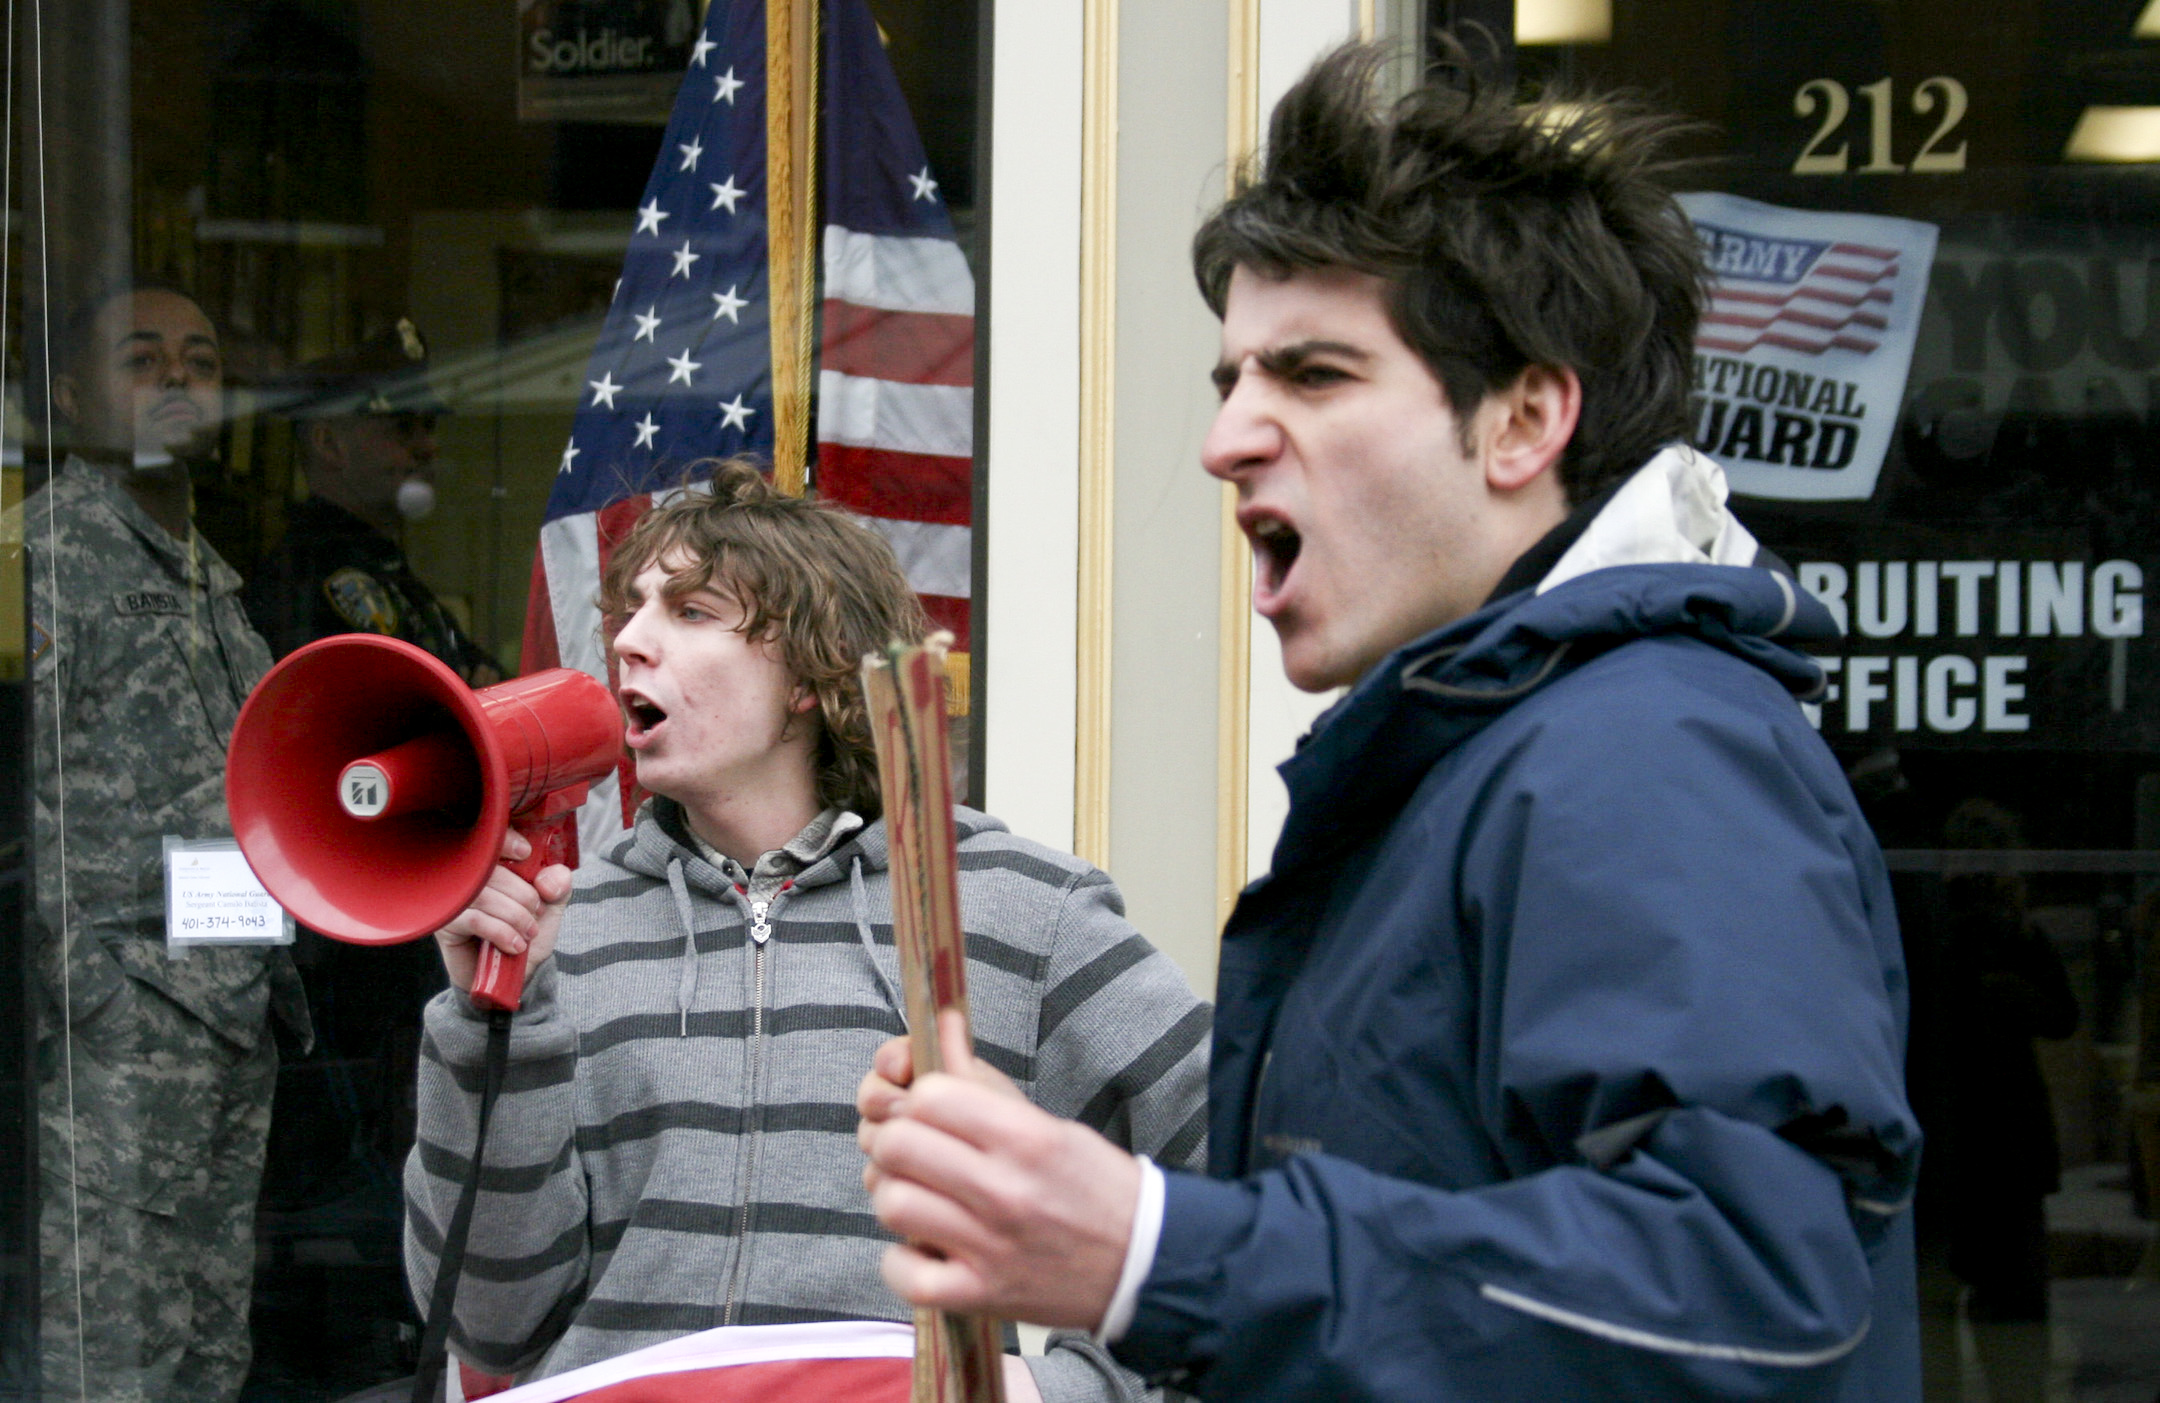  College students protest recruiting practices of a US military recruiting office in Providence, RI. 